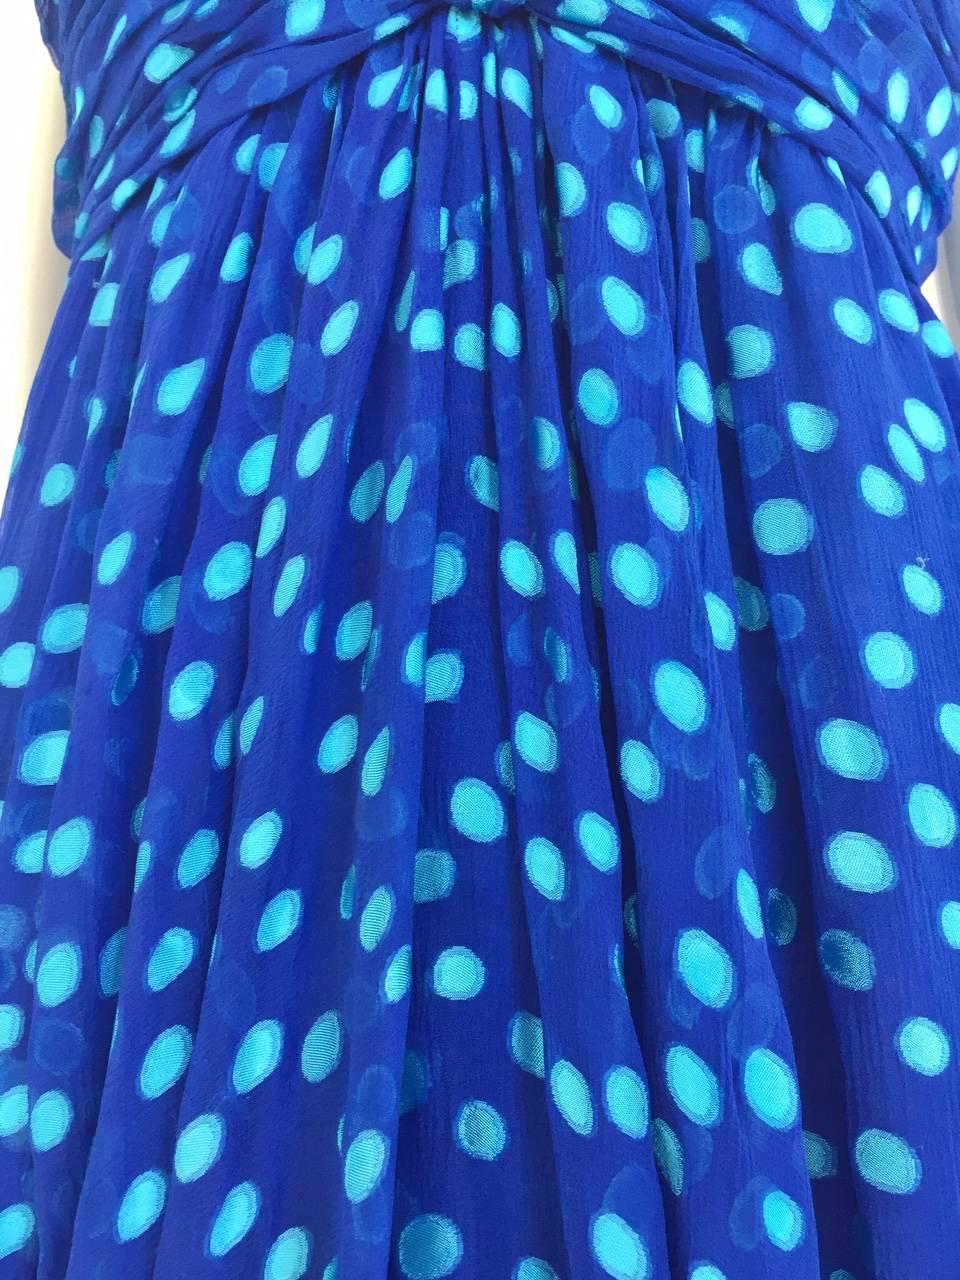 1970s vintage Oscar De La Renta Blue and teal polkadot spaghetti straps silk dress with shawl.
Dress has three layers of silk. Perfect for summer cocktail party.
Size: XS/ Small
Bust: 32 inches